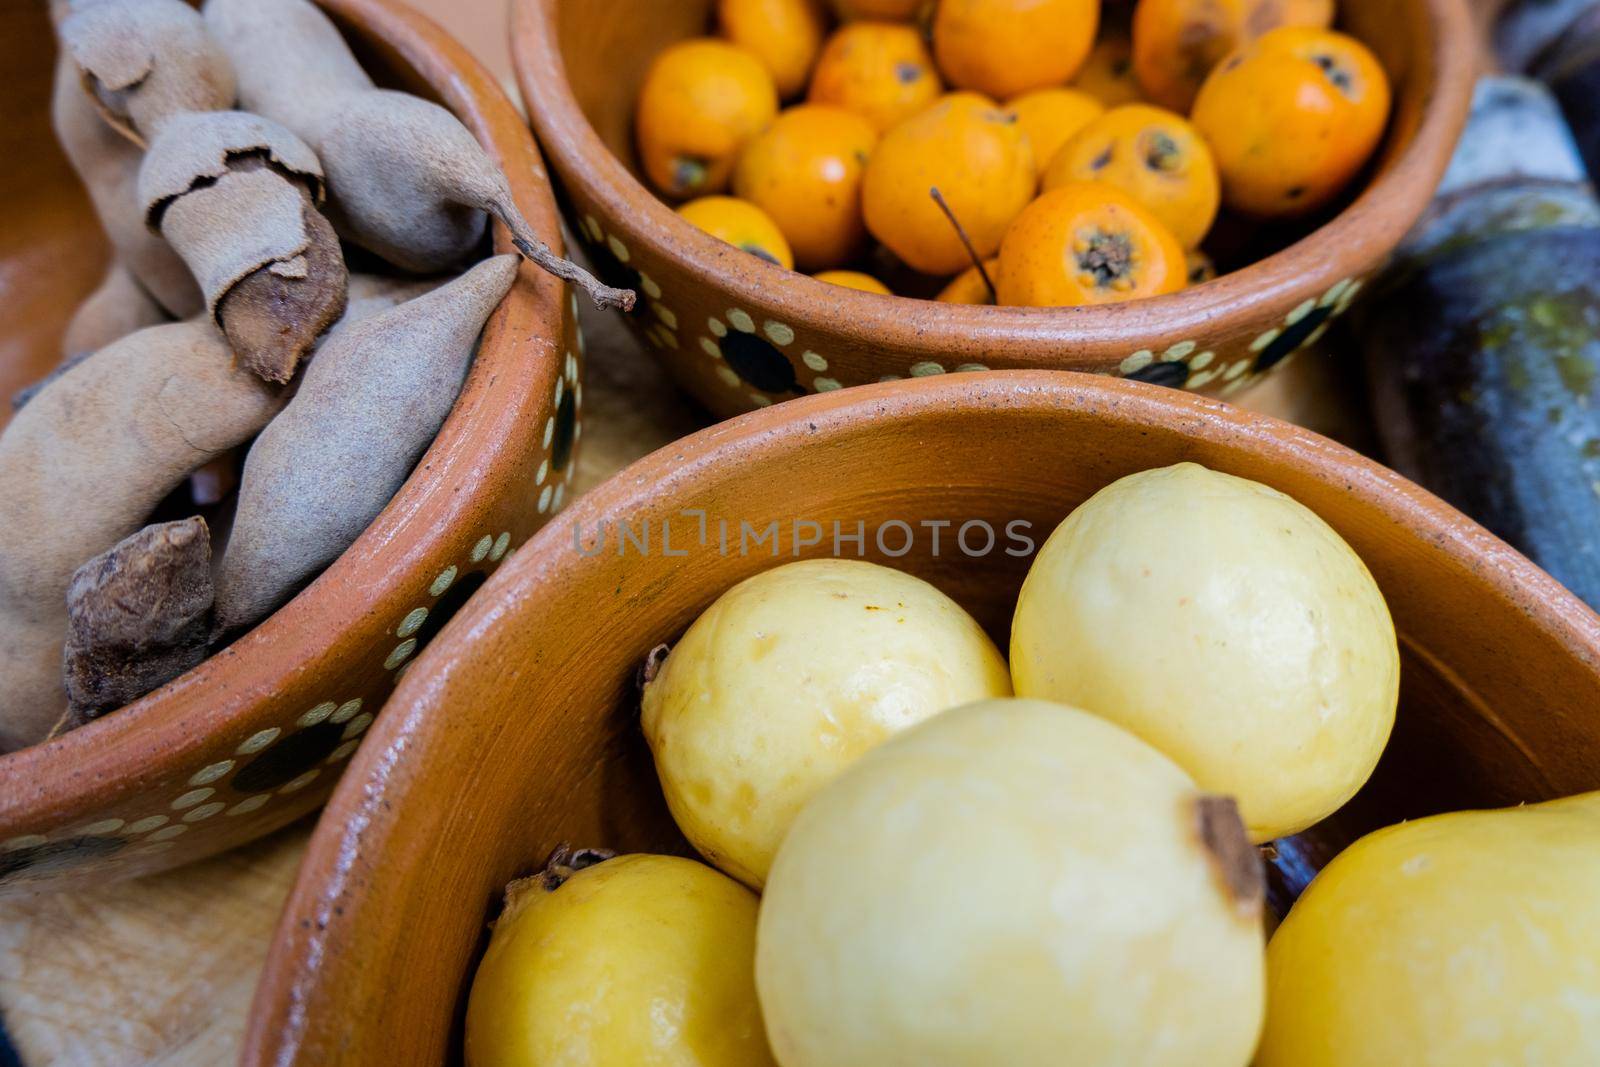 Fresh yellow guavas, Mexican hawthorns, and tamarind in handmade clay bowls. Close-up of brown bowls of Mexican fruit. Traditional snack preparation